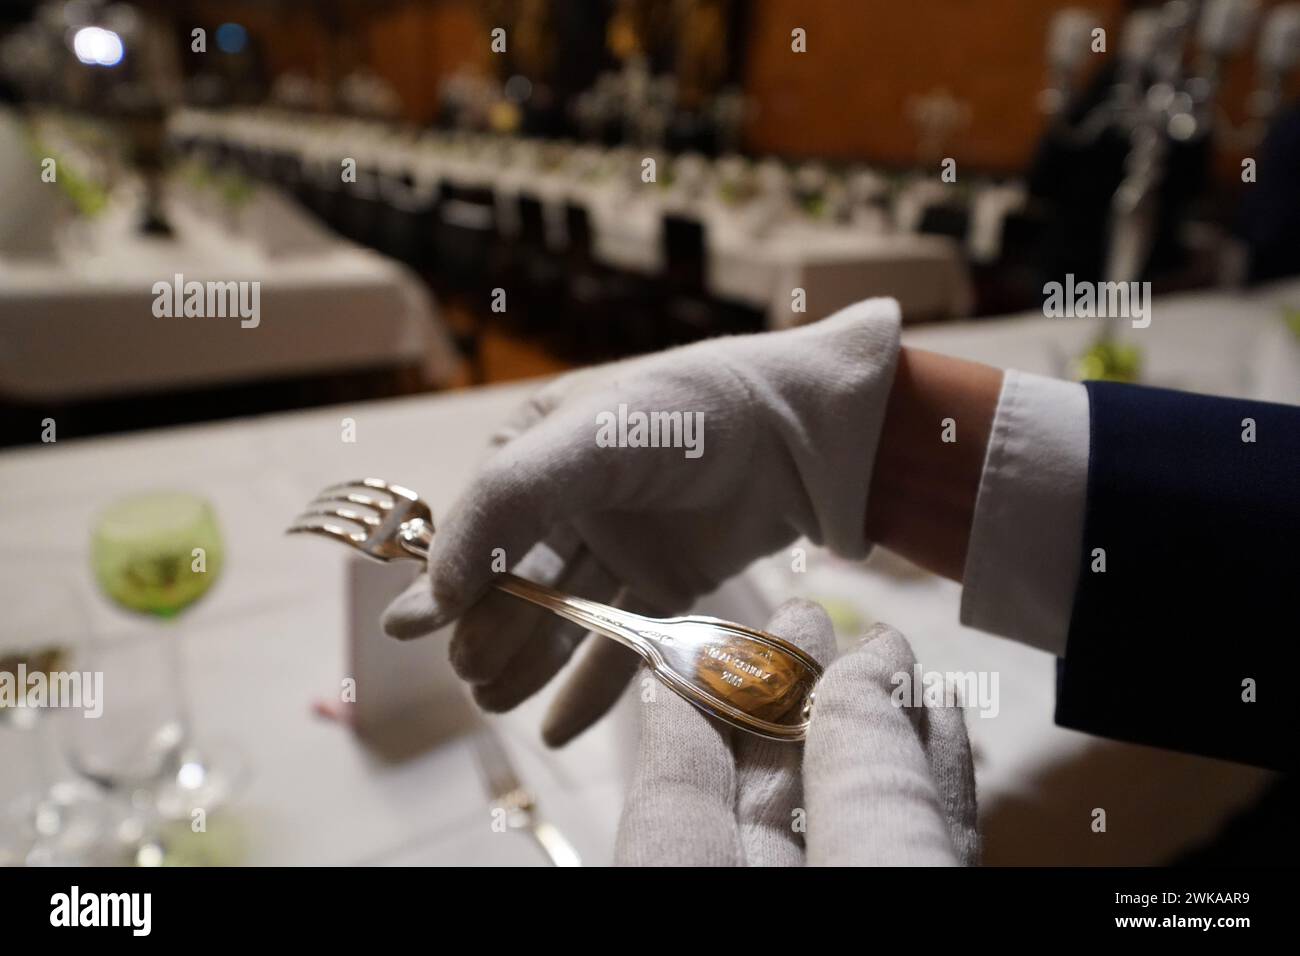 Hamburg, Germany. 19th Feb, 2024. A council servant holds a fork engraved with 'Olaf Scholz' in the large banquet hall during the final preparations for the traditional Matthiae meal of the Hamburg Senate in City Hall. The Prime Minister of the Republic of Estonia, Kallas, and Federal Chancellor Scholz are expected to attend the Matthiae meal as guests of honor. The Matthiae banquet is considered to be the oldest still celebrated banquet in the world. Credit: Marcus Brandt/dpa/Alamy Live News Stock Photo